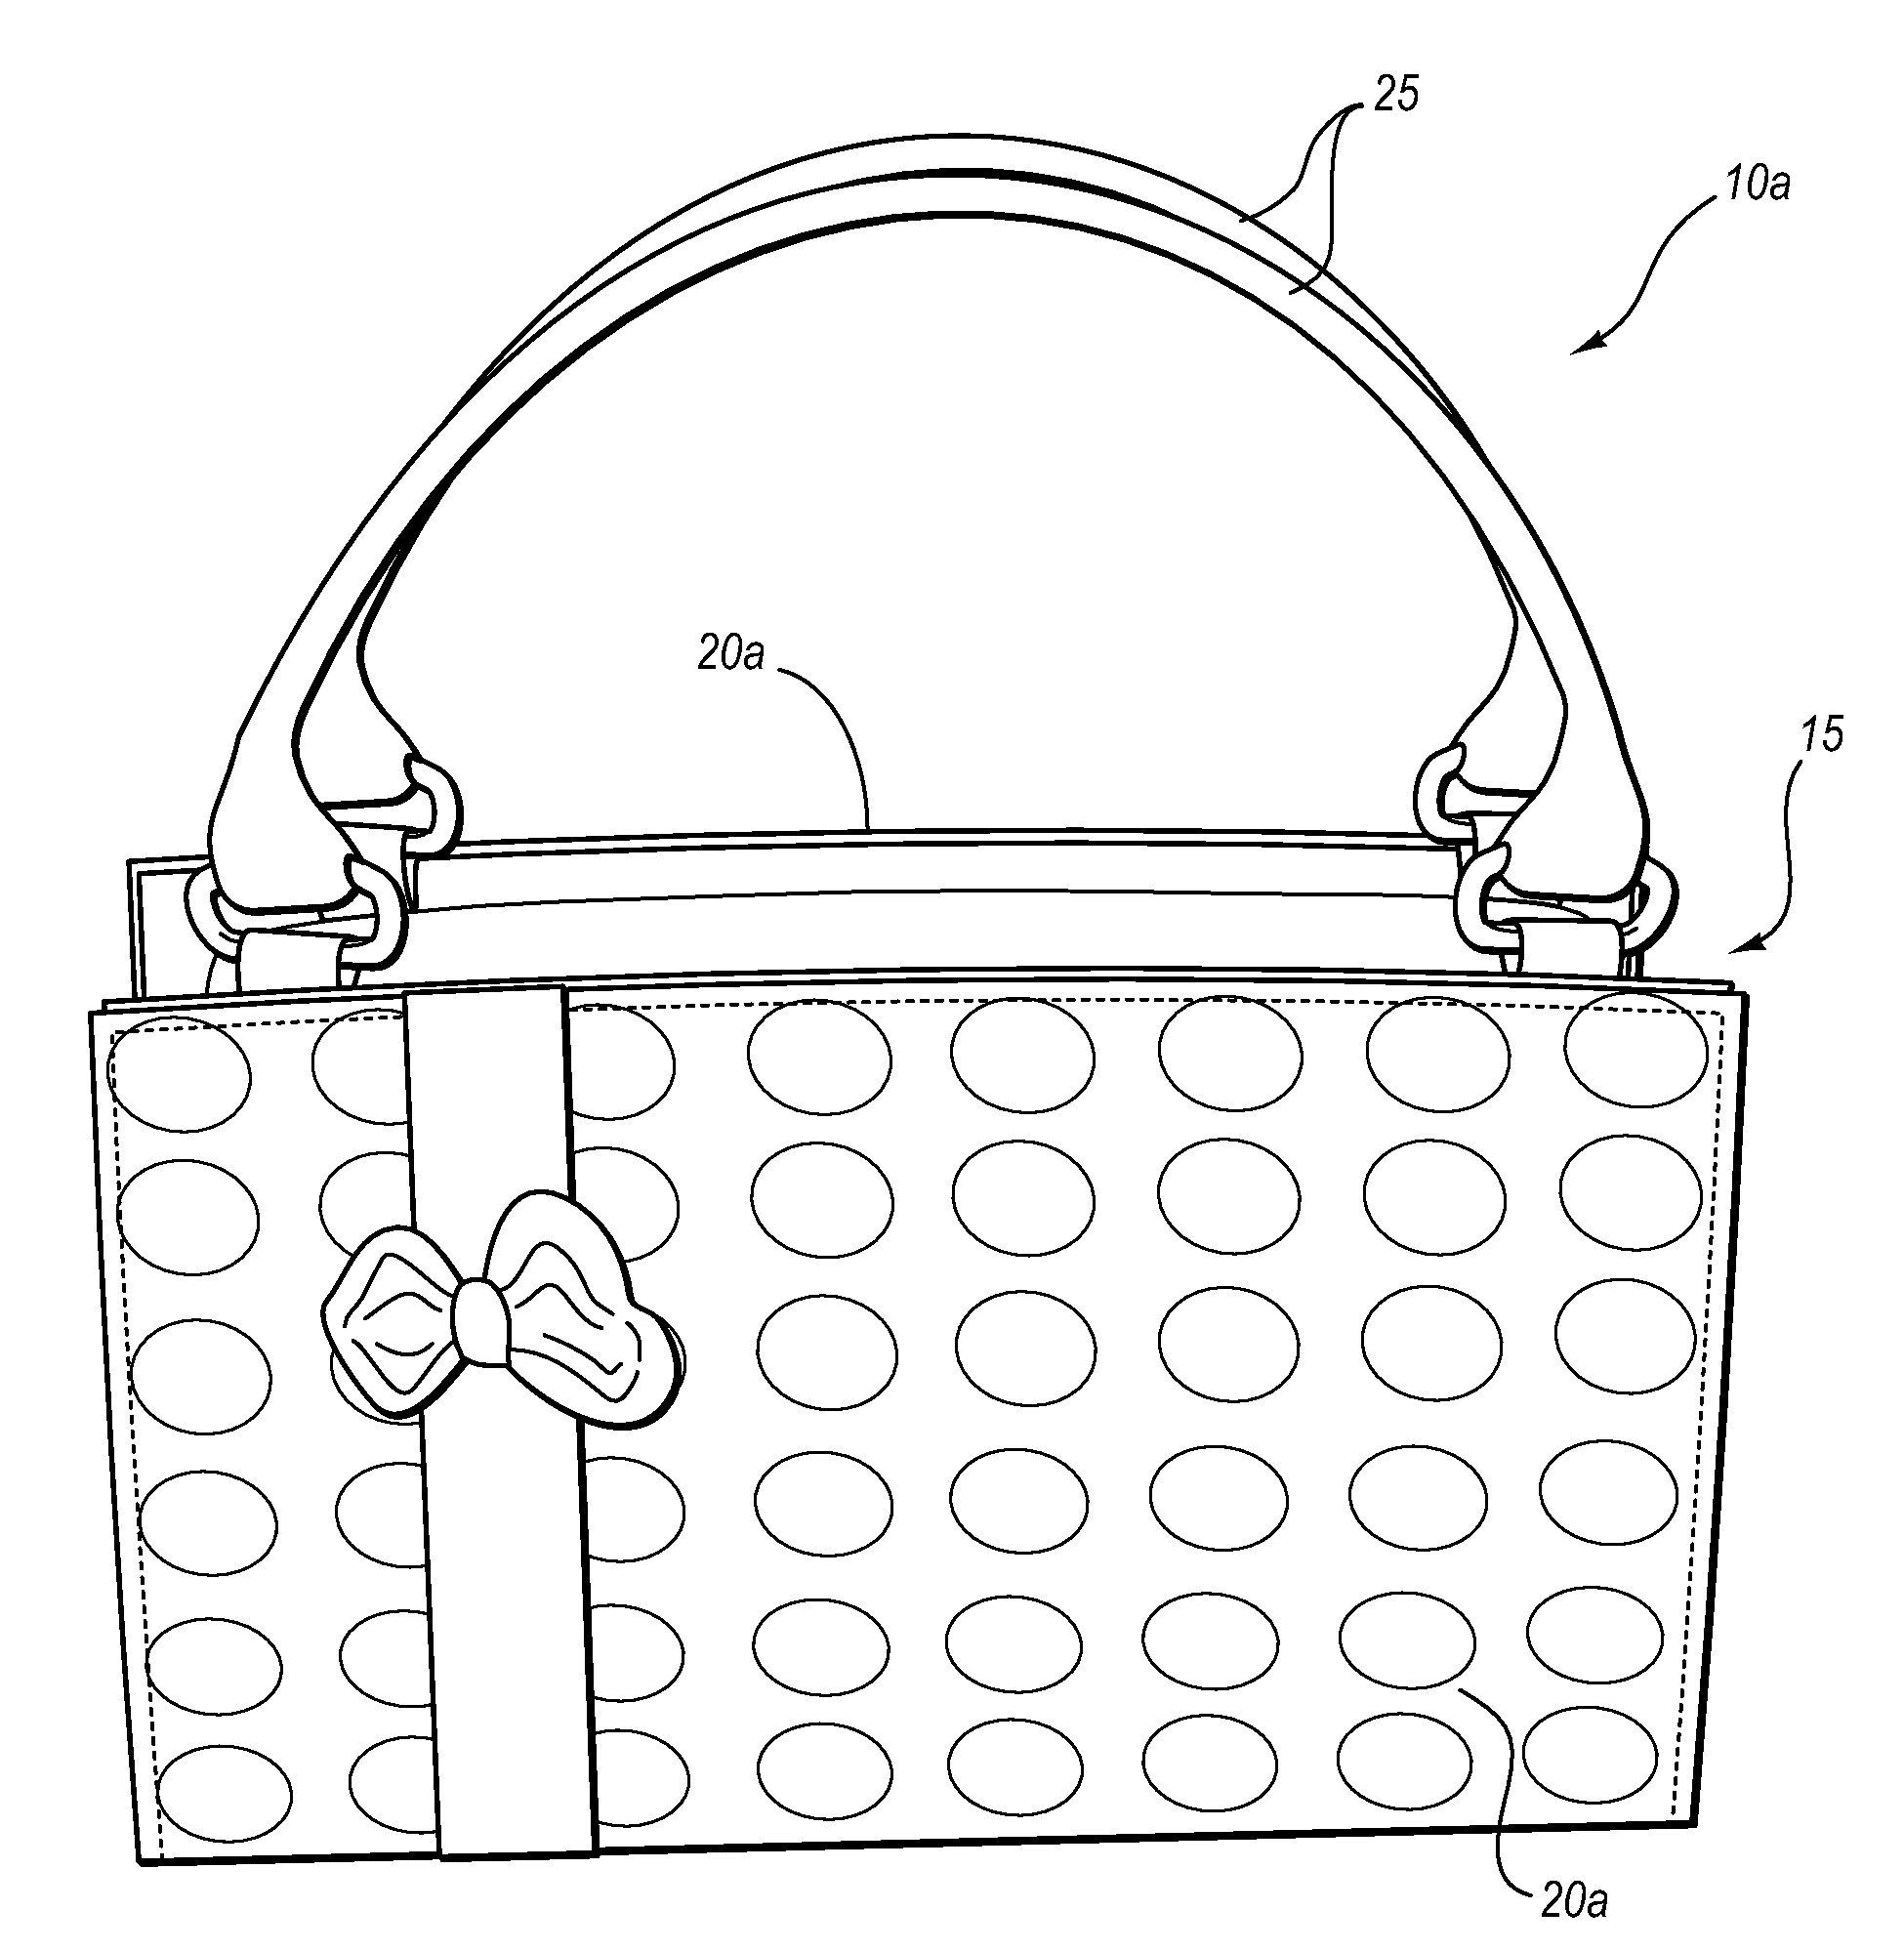 Systems and methods for customizing handbags